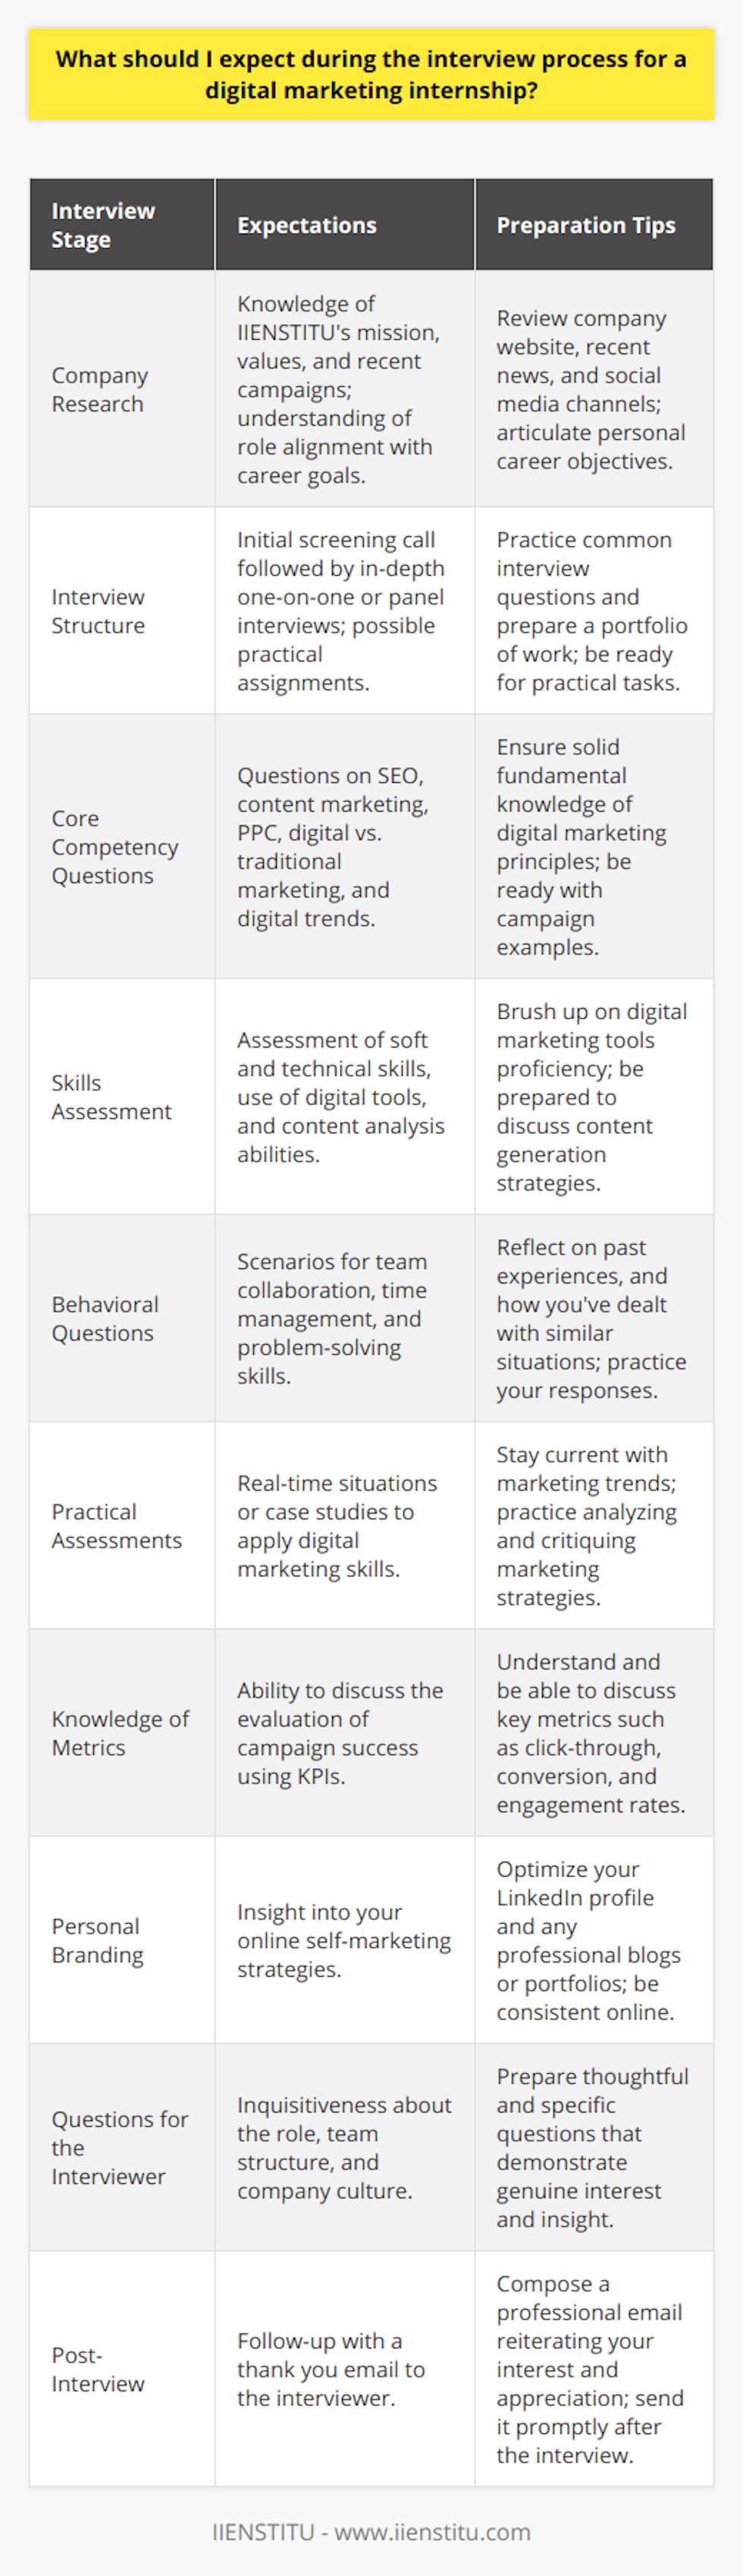 Applying for a digital marketing internship can be a stepping stone towards a rewarding career. However, the interview process may be an unfamiliar challenge. Here’s what you should anticipate during the interview.**Understanding the Company and Role**Companies like IIENSTITU often look for interns who show a genuine interest in their company and have an understanding of the digital marketing landscape. They'll expect you to have researched their company's mission, values, and recent campaigns. They'll also want to ascertain how the internship aligns with your career goals.**Interview Structure**The interview process typically starts with a screening call to gauge interest and basic qualifications. If successful, you’ll be invited to one or more in-depth interviews, which can be either one-on-one or panel interviews. Some companies may require practical assignments to assess your skills.**Core Competency Questions**Expect to be questioned on the core principles of digital marketing, such as SEO, content marketing, PPC, social media marketing, and email marketing. You will most likely be asked what differentiates digital marketing from traditional marketing, current digital marketing trends, and possibly to provide examples of successful digital marketing campaigns and why they worked.**Skill-Related Questions**During a digital marketing internship interview, expect questions that assess both your soft and technical skills. Interviewers are likely to ask about your experience with digital marketing tools—this could range from Google Analytics to social media management platforms. They’ll also be interested in your ability to generate and analyze digital content.**Behavioral Questions**Interviewers will pose scenarios relating to team collaboration, time management, and problem-solving to assess your behavioral traits. You may be asked how you would prioritize tasks if given multiple assignments or how you would react to critical feedback on a digital campaign you developed.**Practical Assessments**Some interviewers may present real-time situations or case studies to test your practical application of digital marketing principles. Don't be surprised if you're asked to critique a current campaign or create a brief digital strategy based on a hypothetical product.**Knowledge of Metrics**Understanding digital marketing metrics is crucial. You should be prepared to discuss how you would evaluate the success of a campaign, explaining key performance indicators like click-through rates, conversion rates, and engagement rates.**Personal Branding**In the world of marketing, personal branding is important. You might be asked about how you market yourself online—this can pertain to professional profiles such as LinkedIn or a personal blog.**Questions for the Interviewer**Be prepared with intelligent questions for the interviewer, demonstrating your insight and curiosity about the role. Good questions could involve asking about the team structure, typical projects an intern would work on, or company culture.**Post-Interview**After the interview, make sure to send a follow-up thank you email. This adds a professional touch and keeps you fresh in the interviewer's memory.Remember, the goal of the interview process is to assess your potential as a digital marketer and to see if you're a cultural fit for the company. By being well prepared and displaying a genuine passion for digital marketing, you can increase your chances of securing the internship and gaining valuable industry experience.